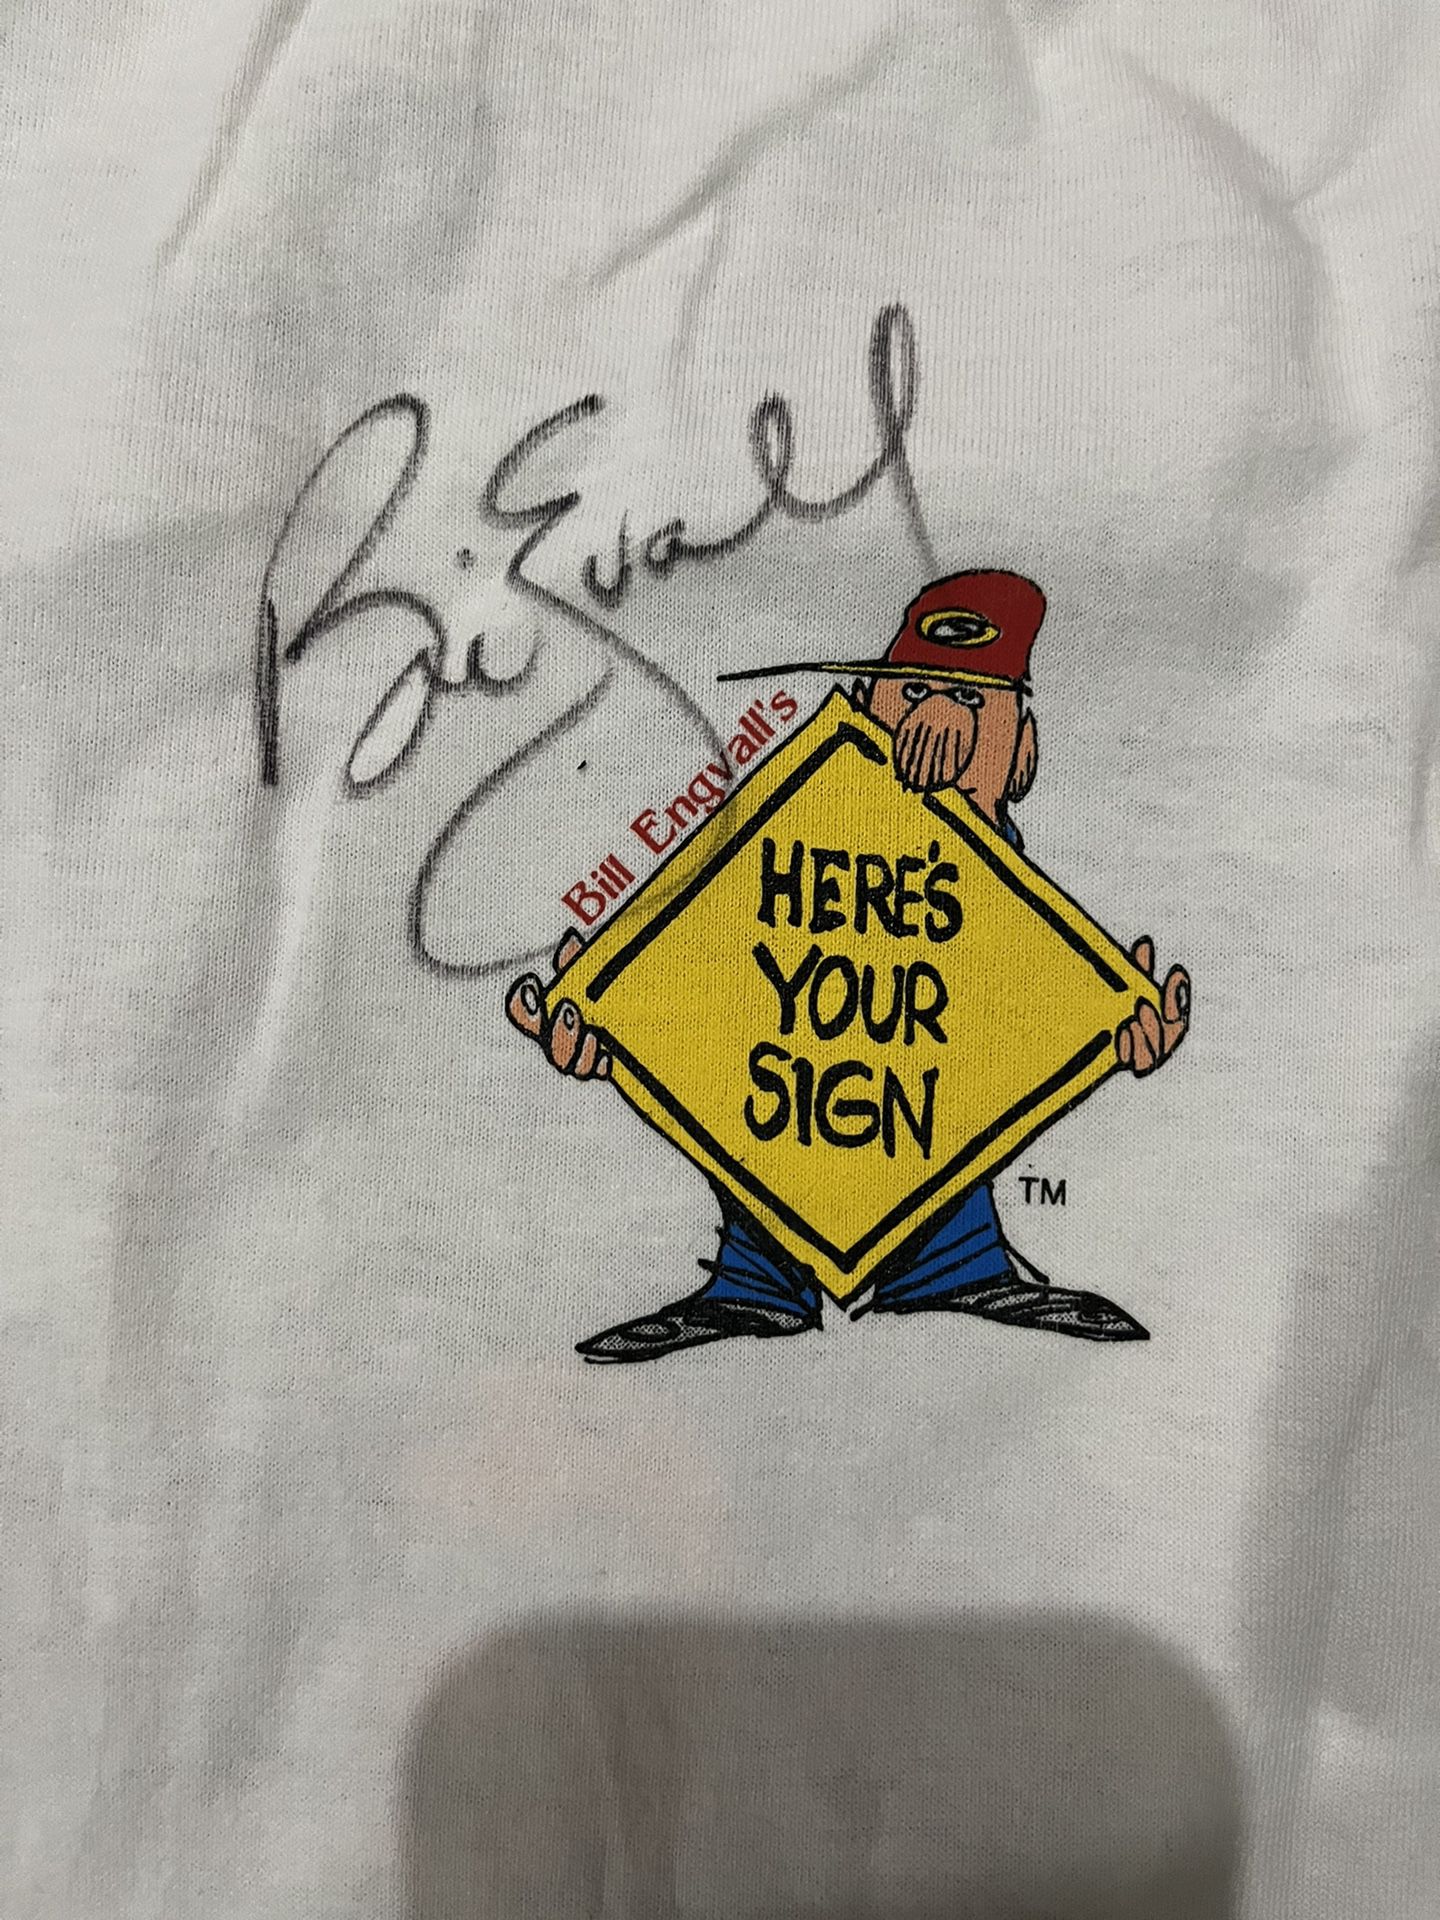 Autographed T-shirt from Bill Engel   Lg 